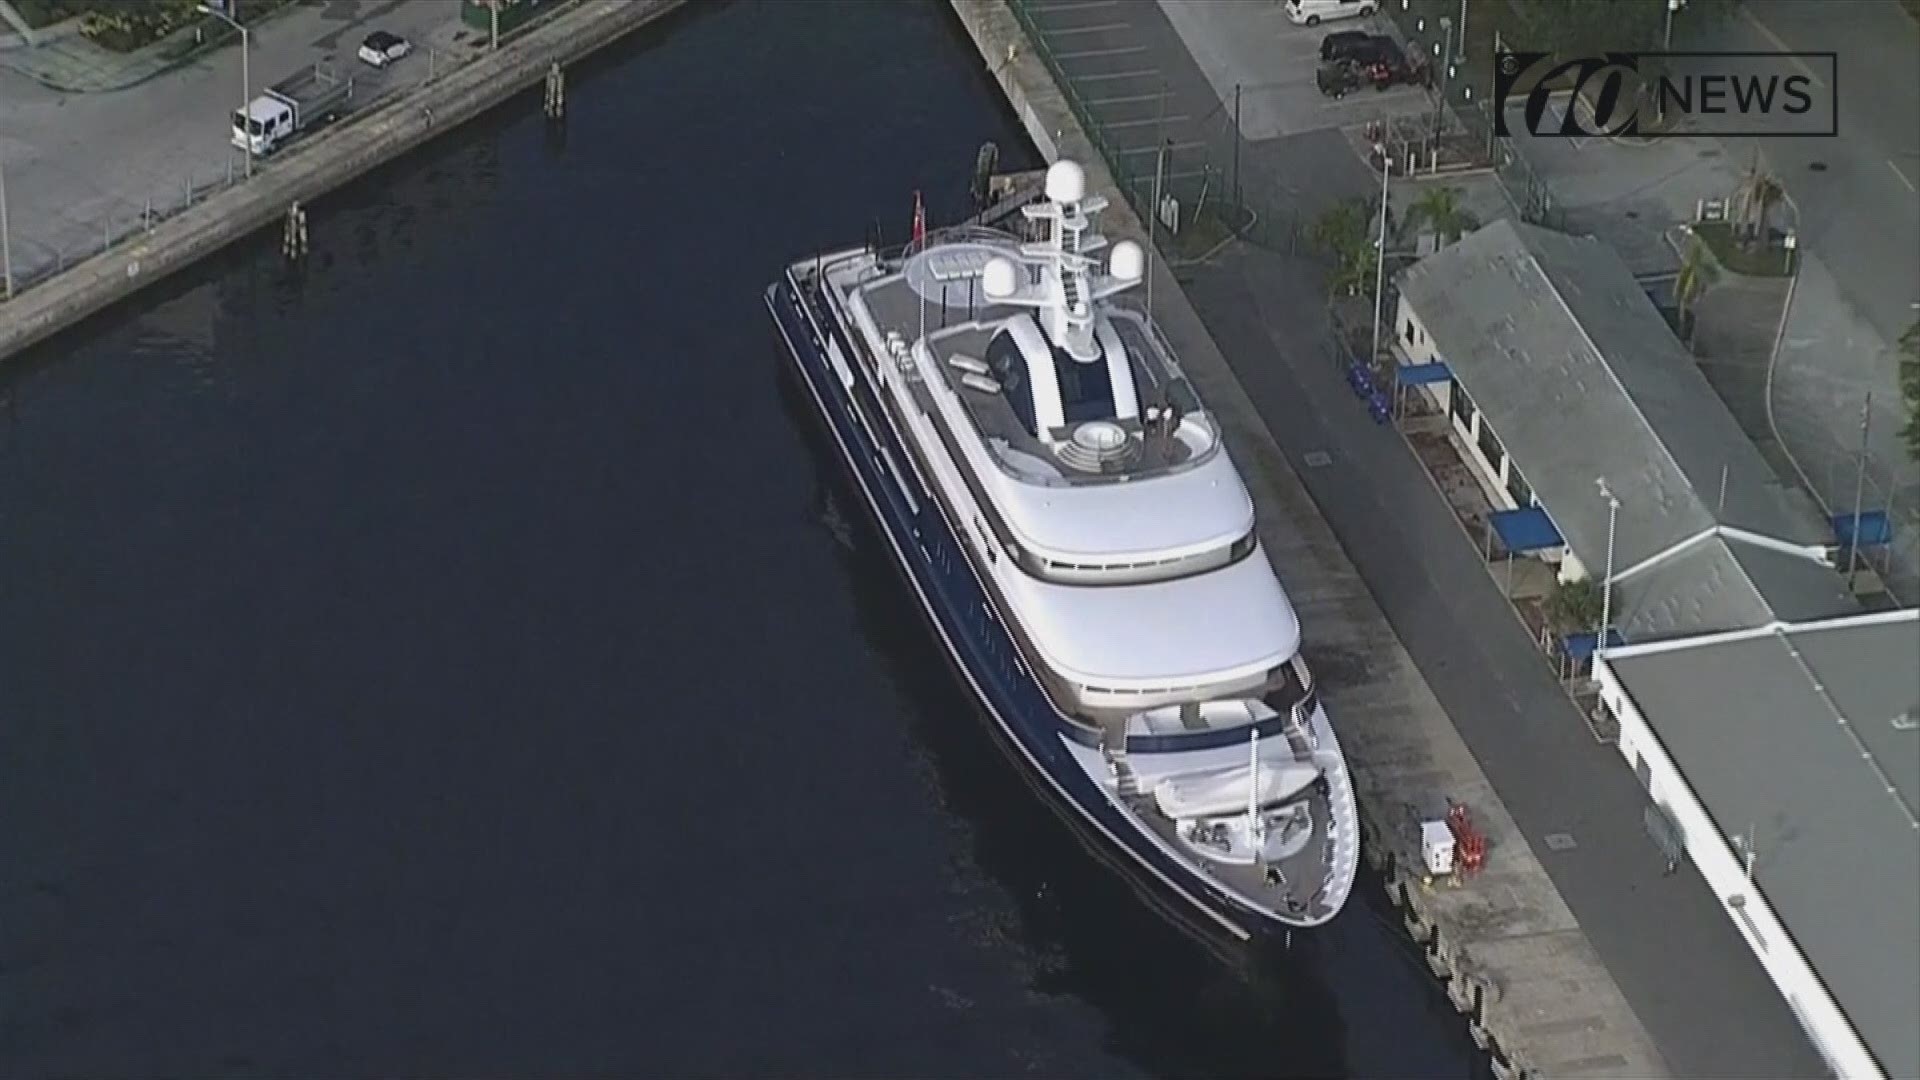 A yacht that costs $650,000 a week to rent is docked in St. Petersburg.